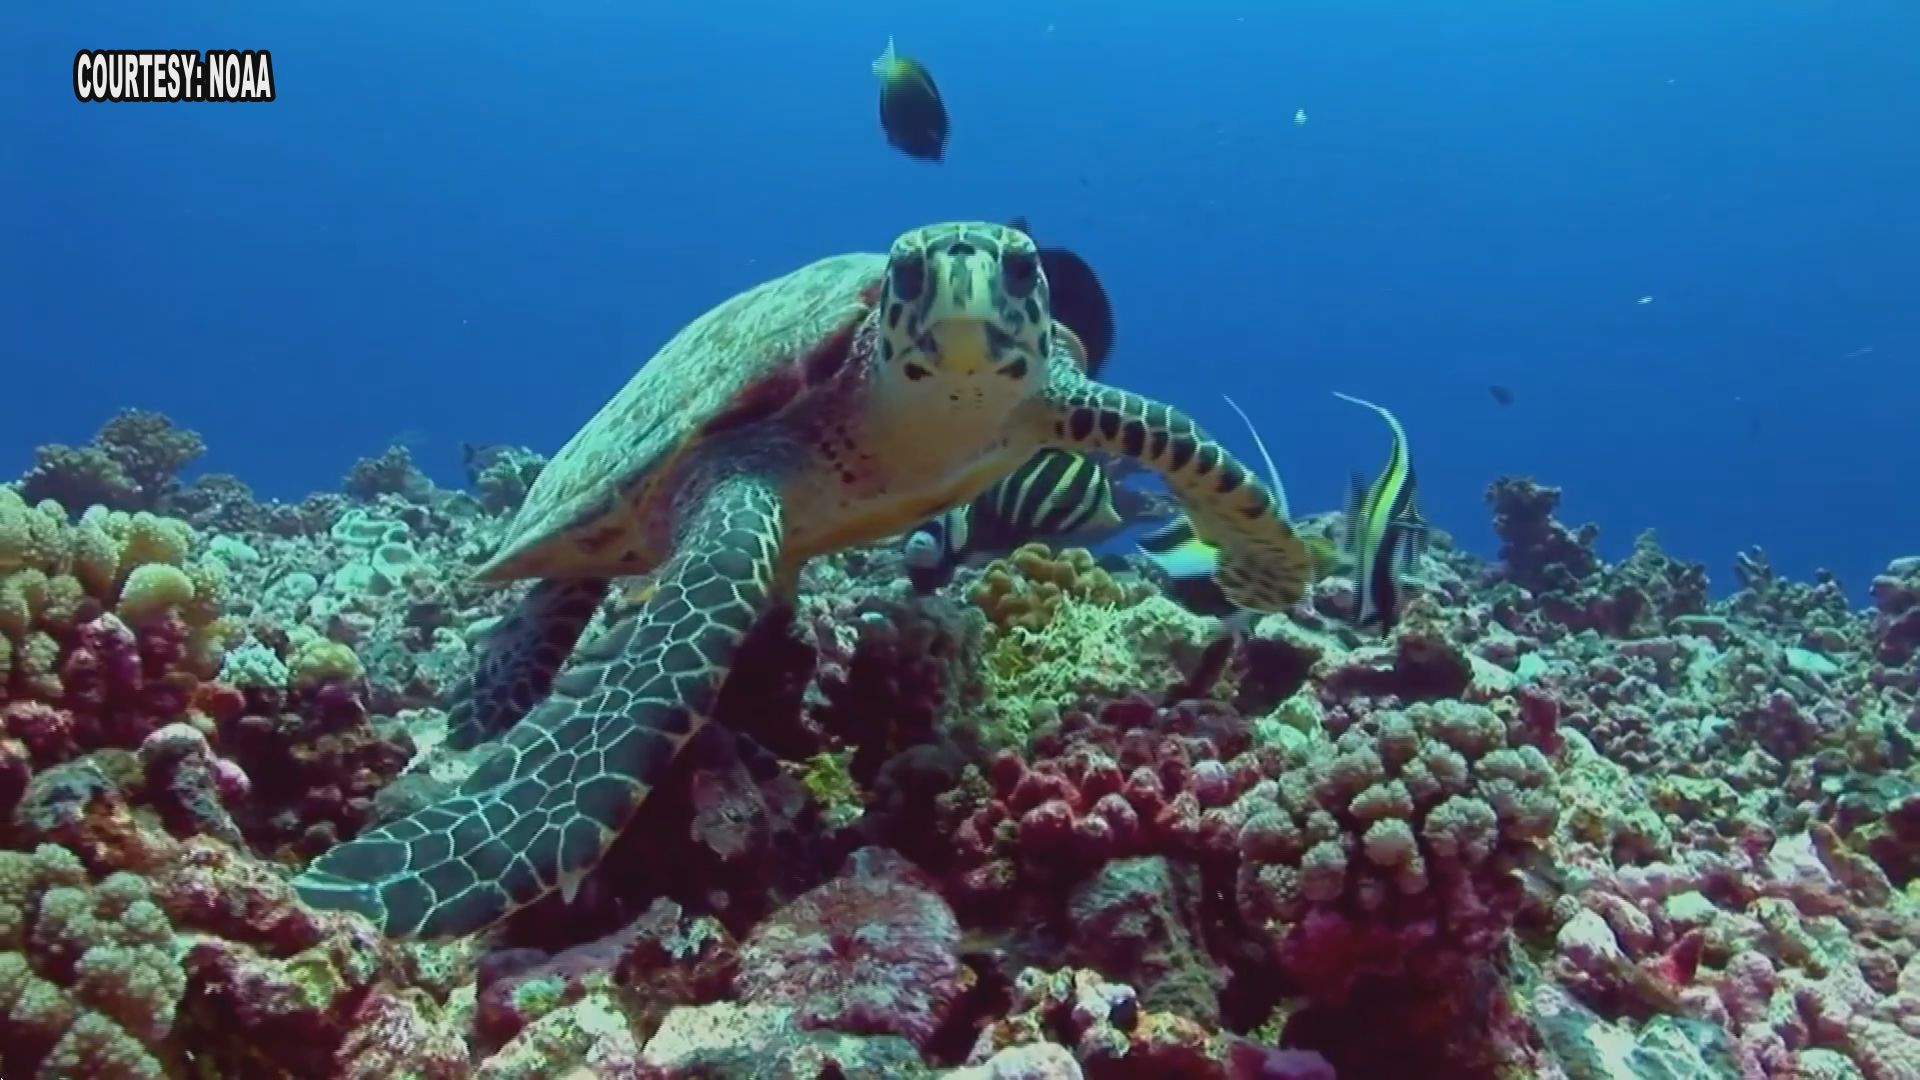 State Dept., NOAA Continue Efforts to Help Save Sea Turtles